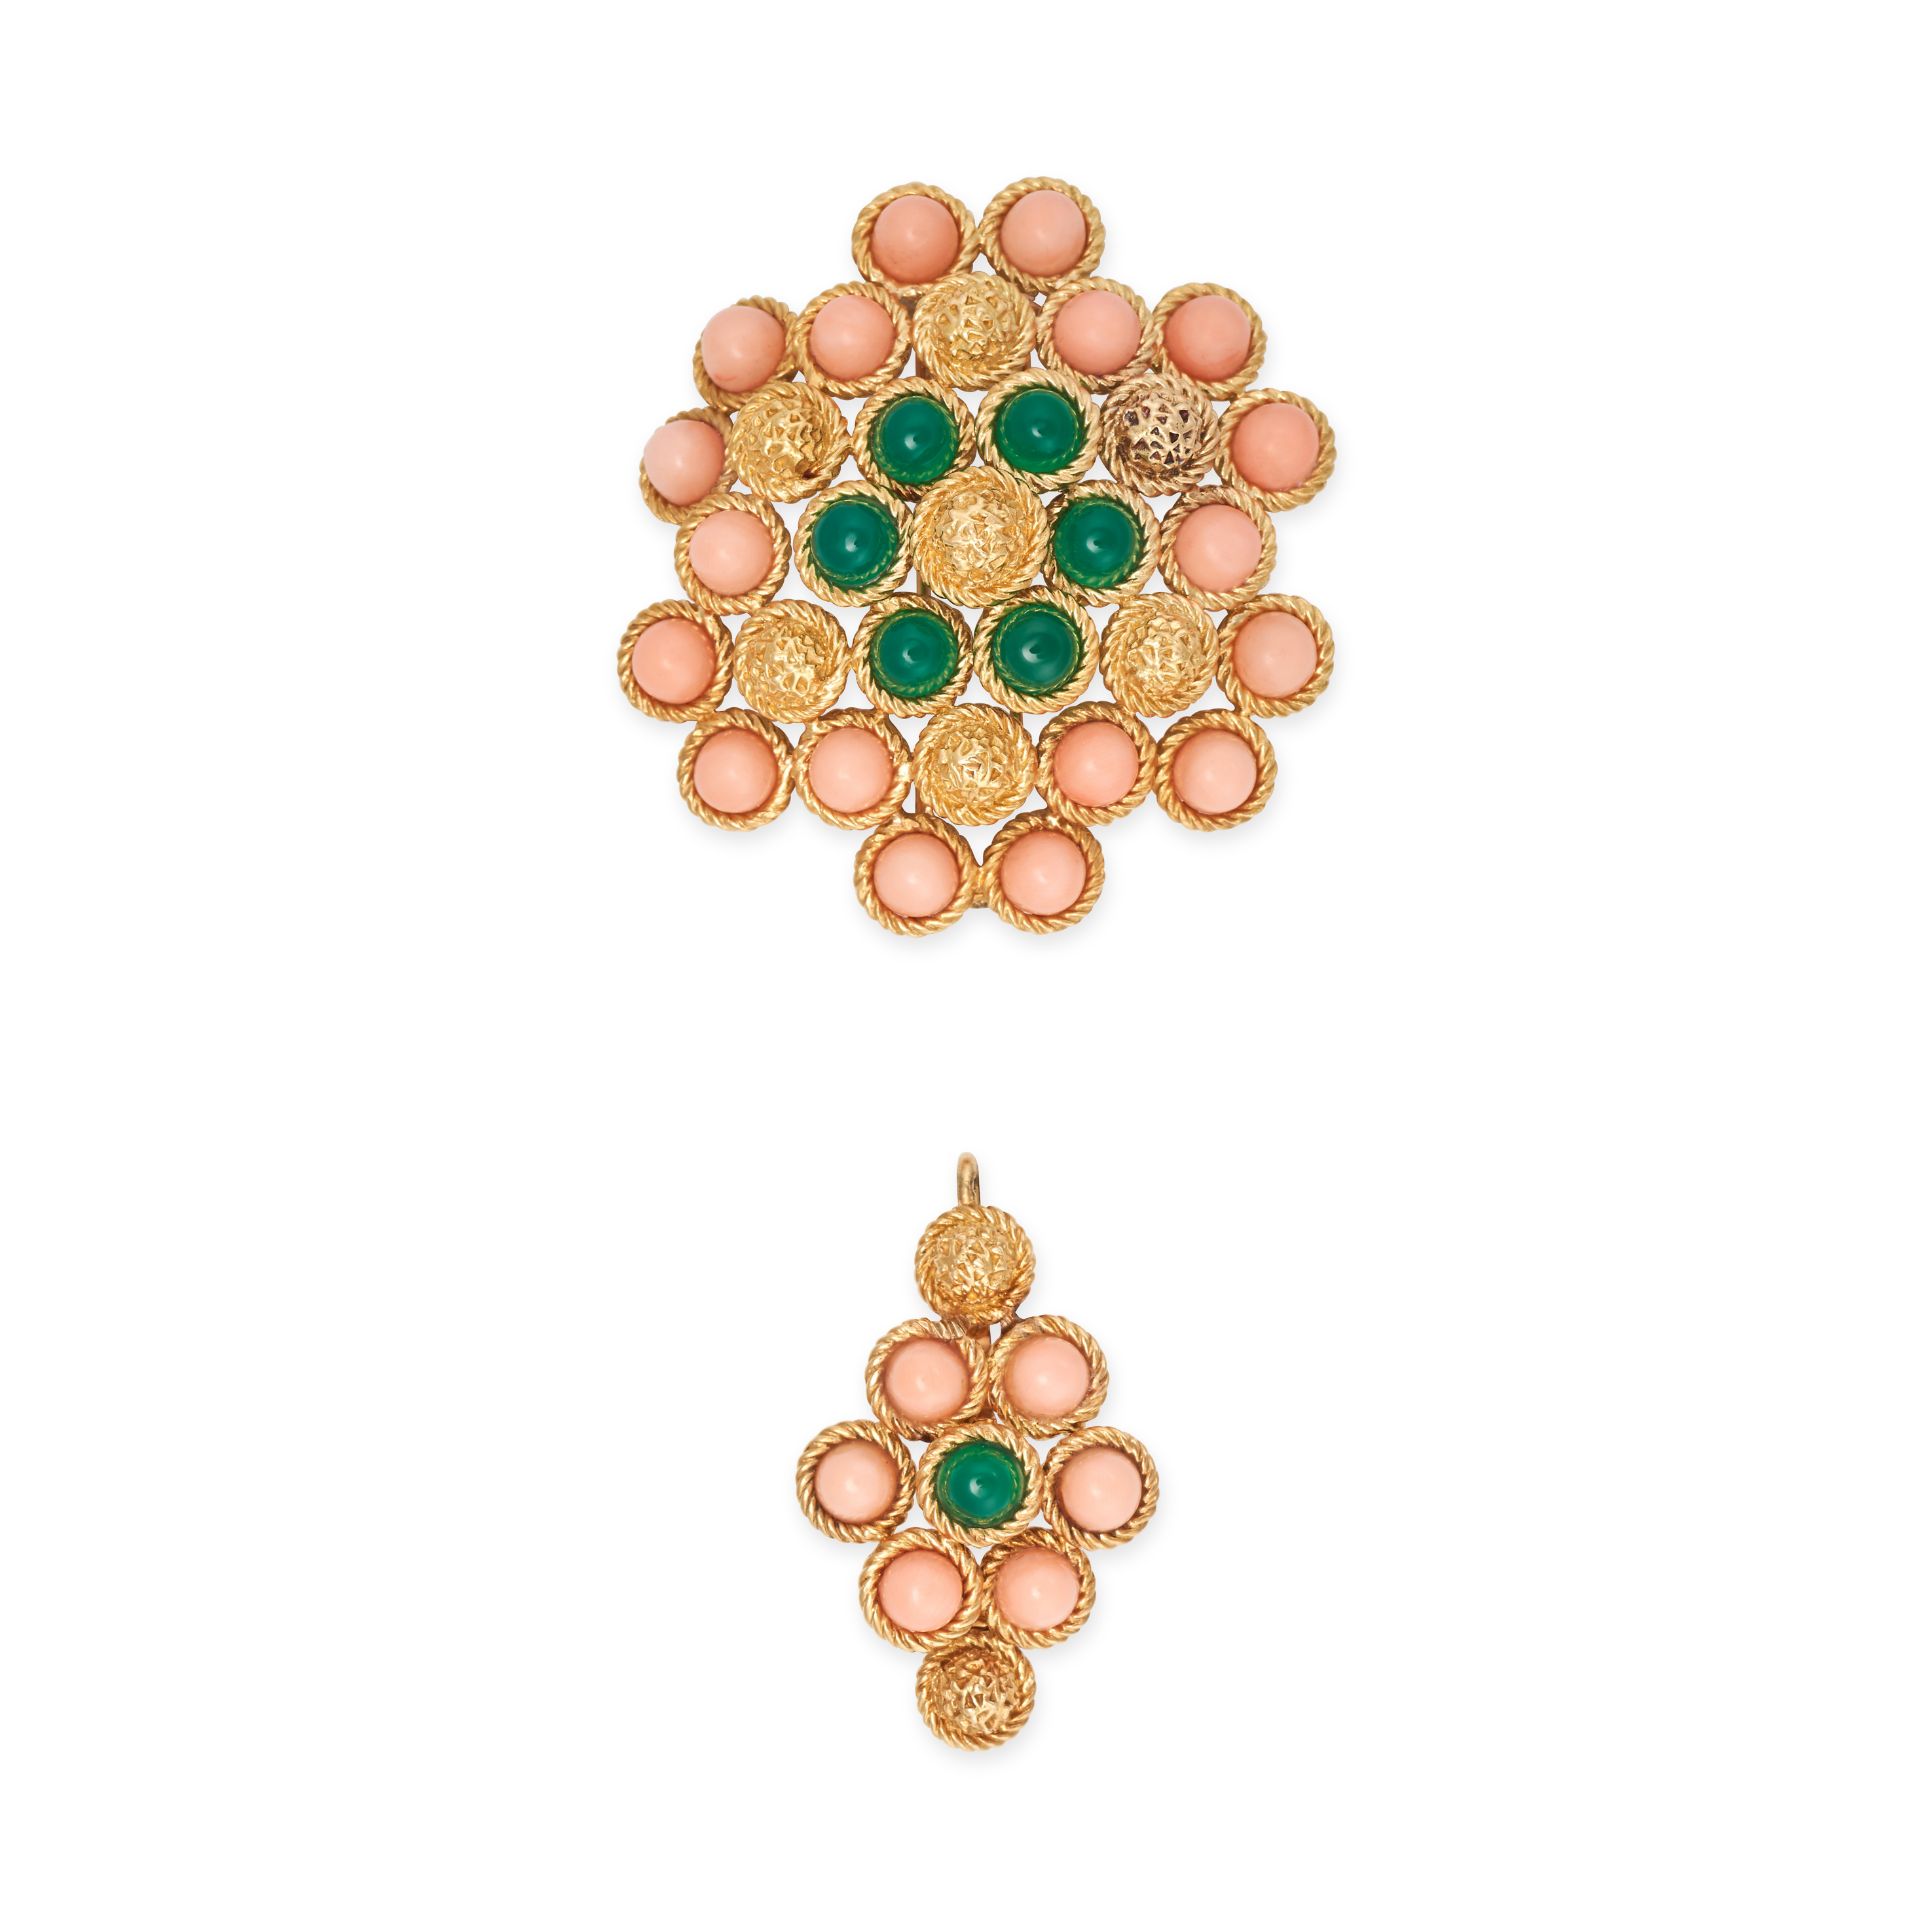 VAN CLEEF & ARPELS, A COLLECTION OF FRENCH CORAL AND CHRYSOPRASE VAN CLEEF & ARPELS JEWELLERY in ... - Bild 7 aus 8